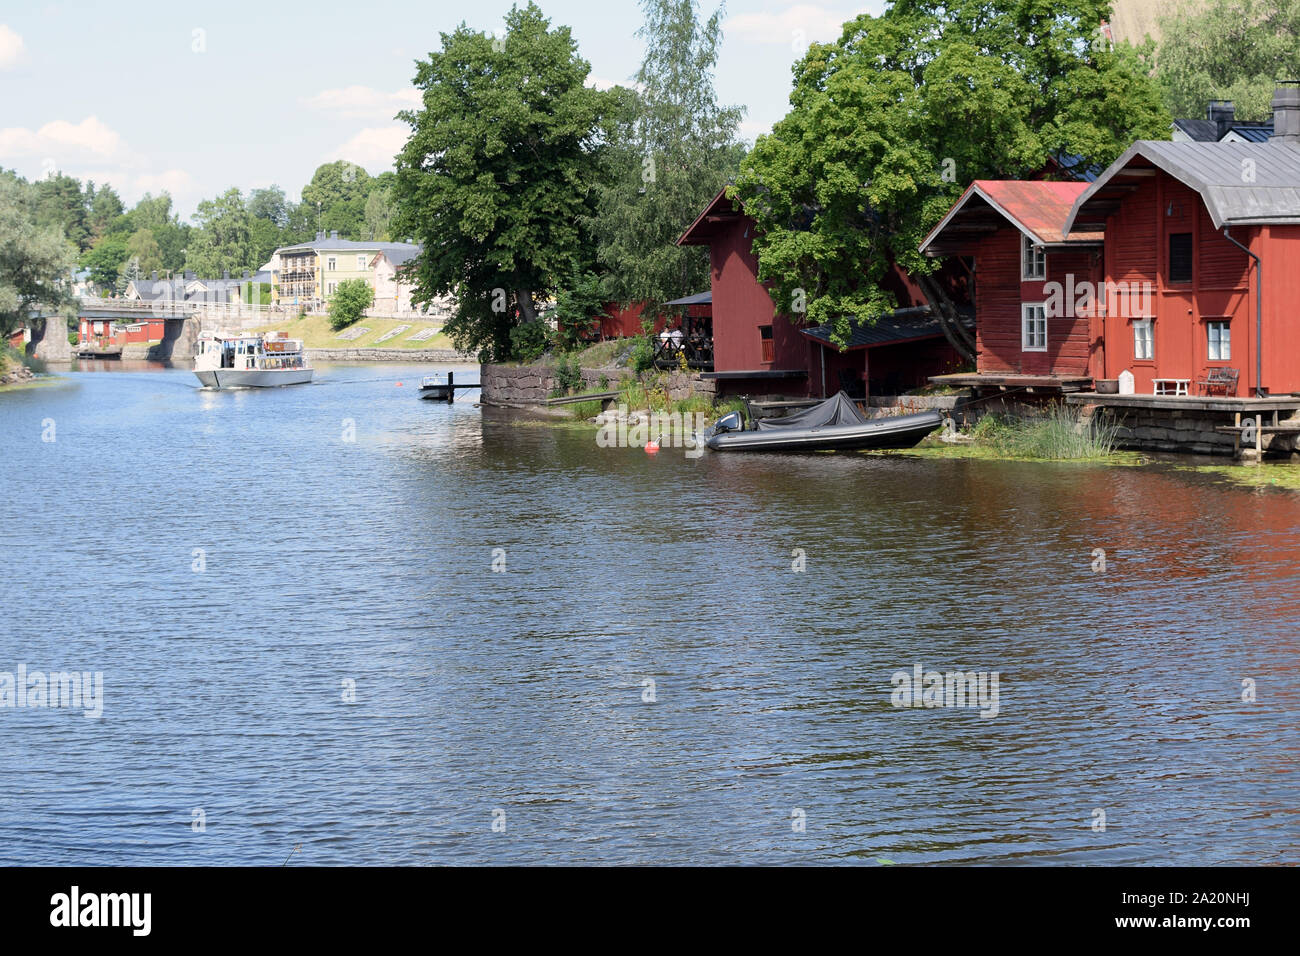 River Porvoo (Porvoonjoki in Finnish) and old wooden red houses on the riverside. Stock Photo